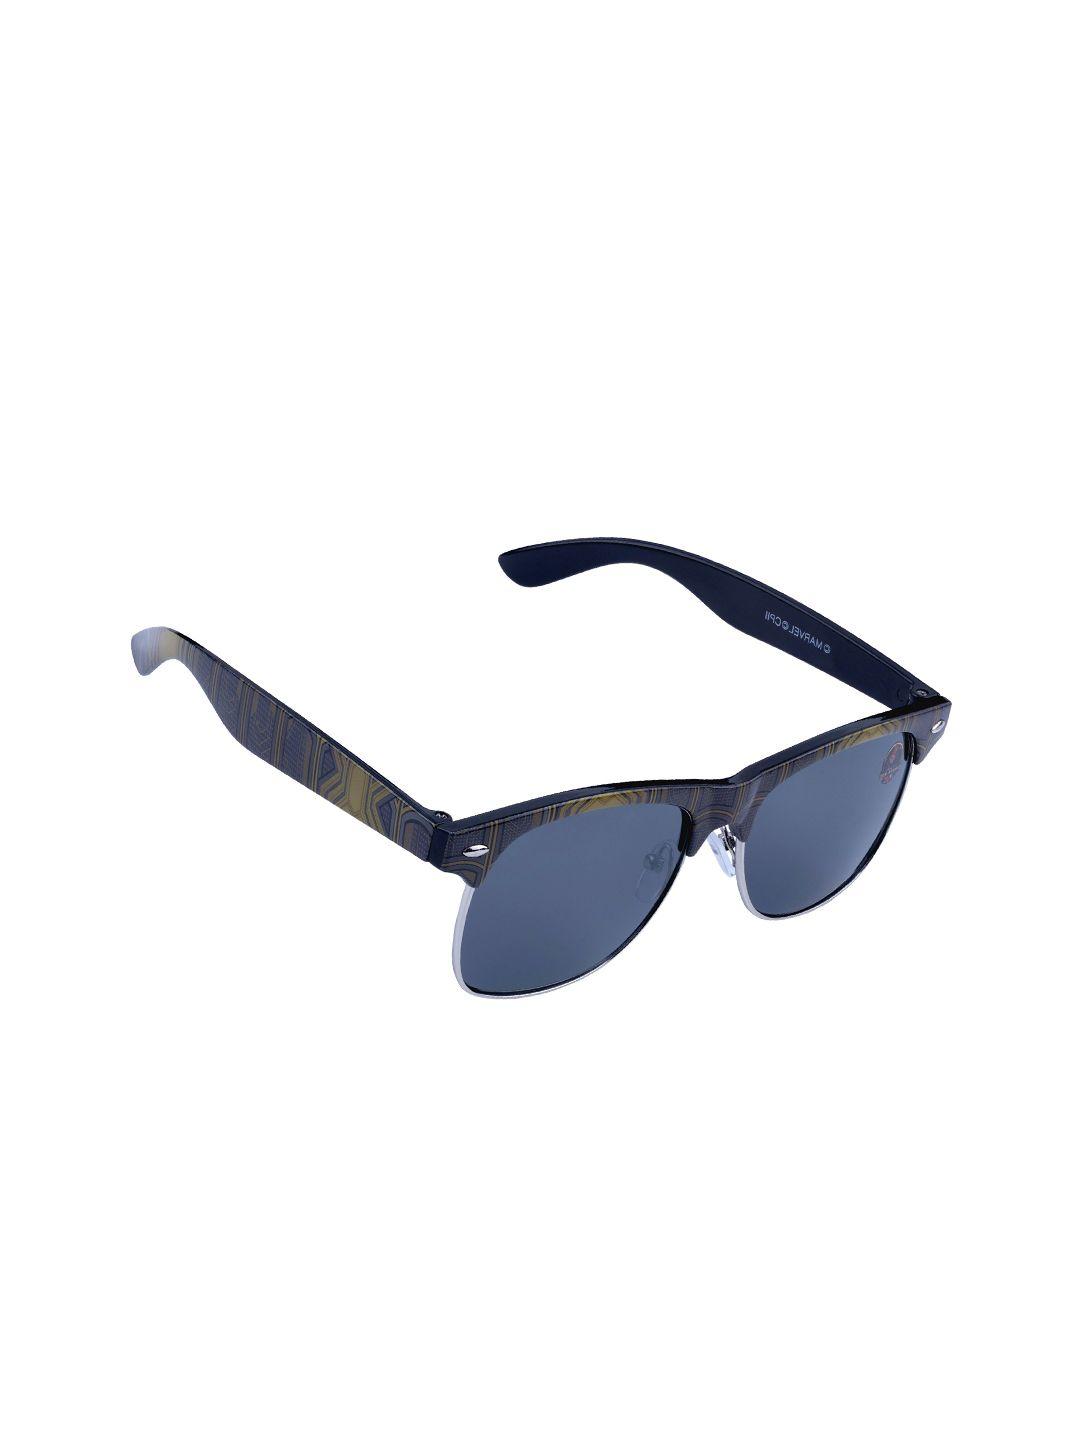 Marvel Boys Grey & Blue Square Sunglasses With Polarised and UV Protected Lens